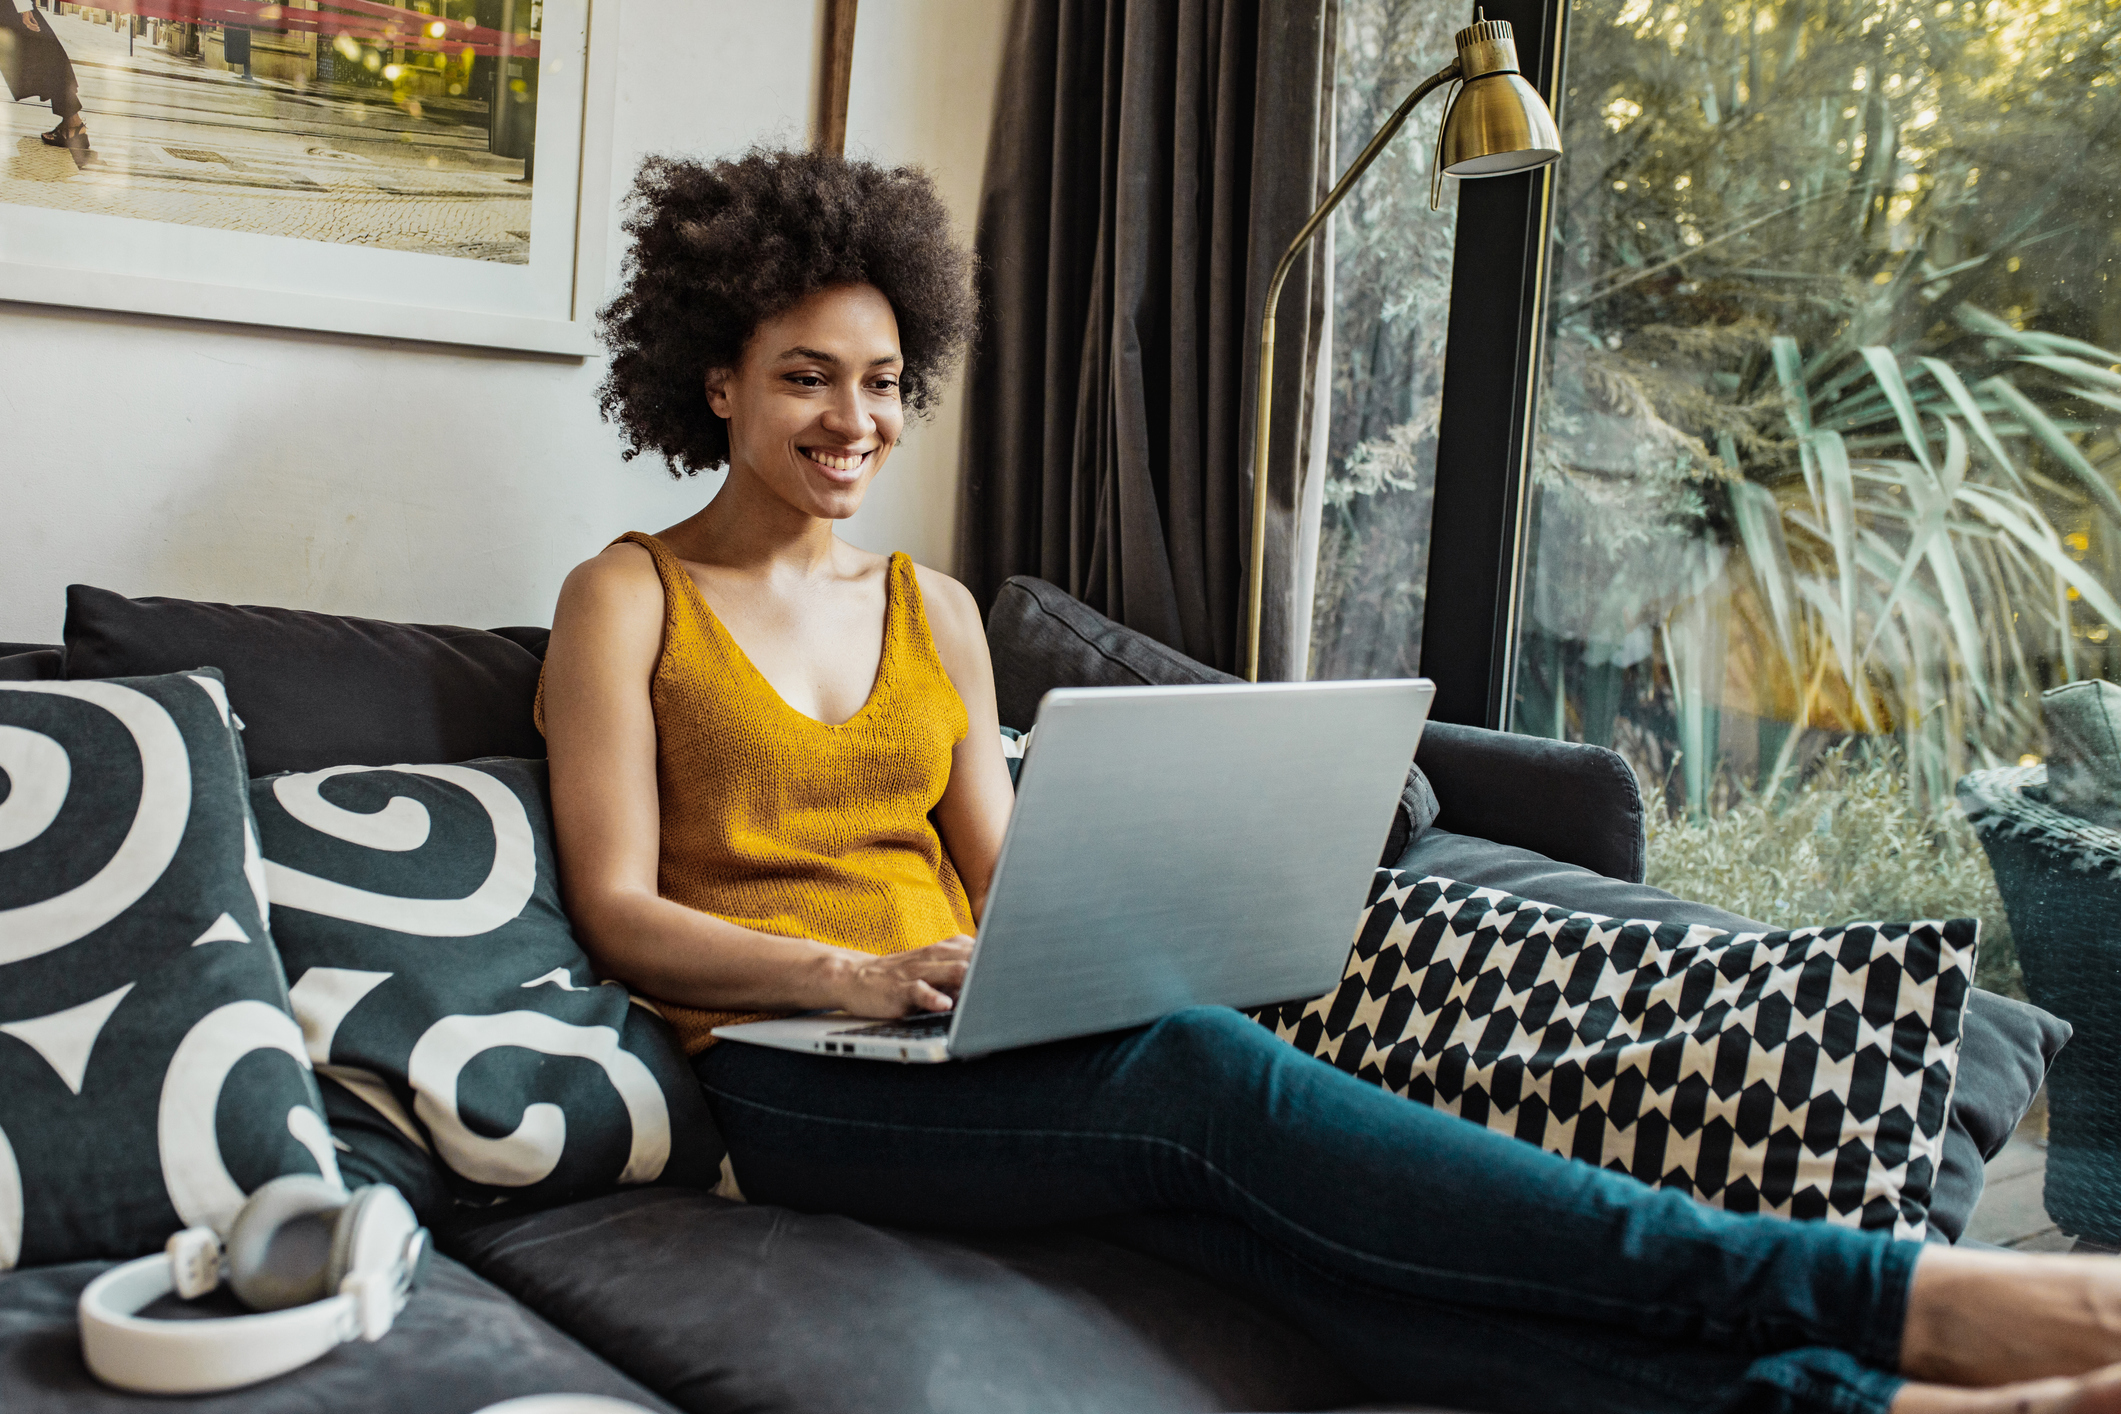 A mixed-race woman is using a laptop and working from home